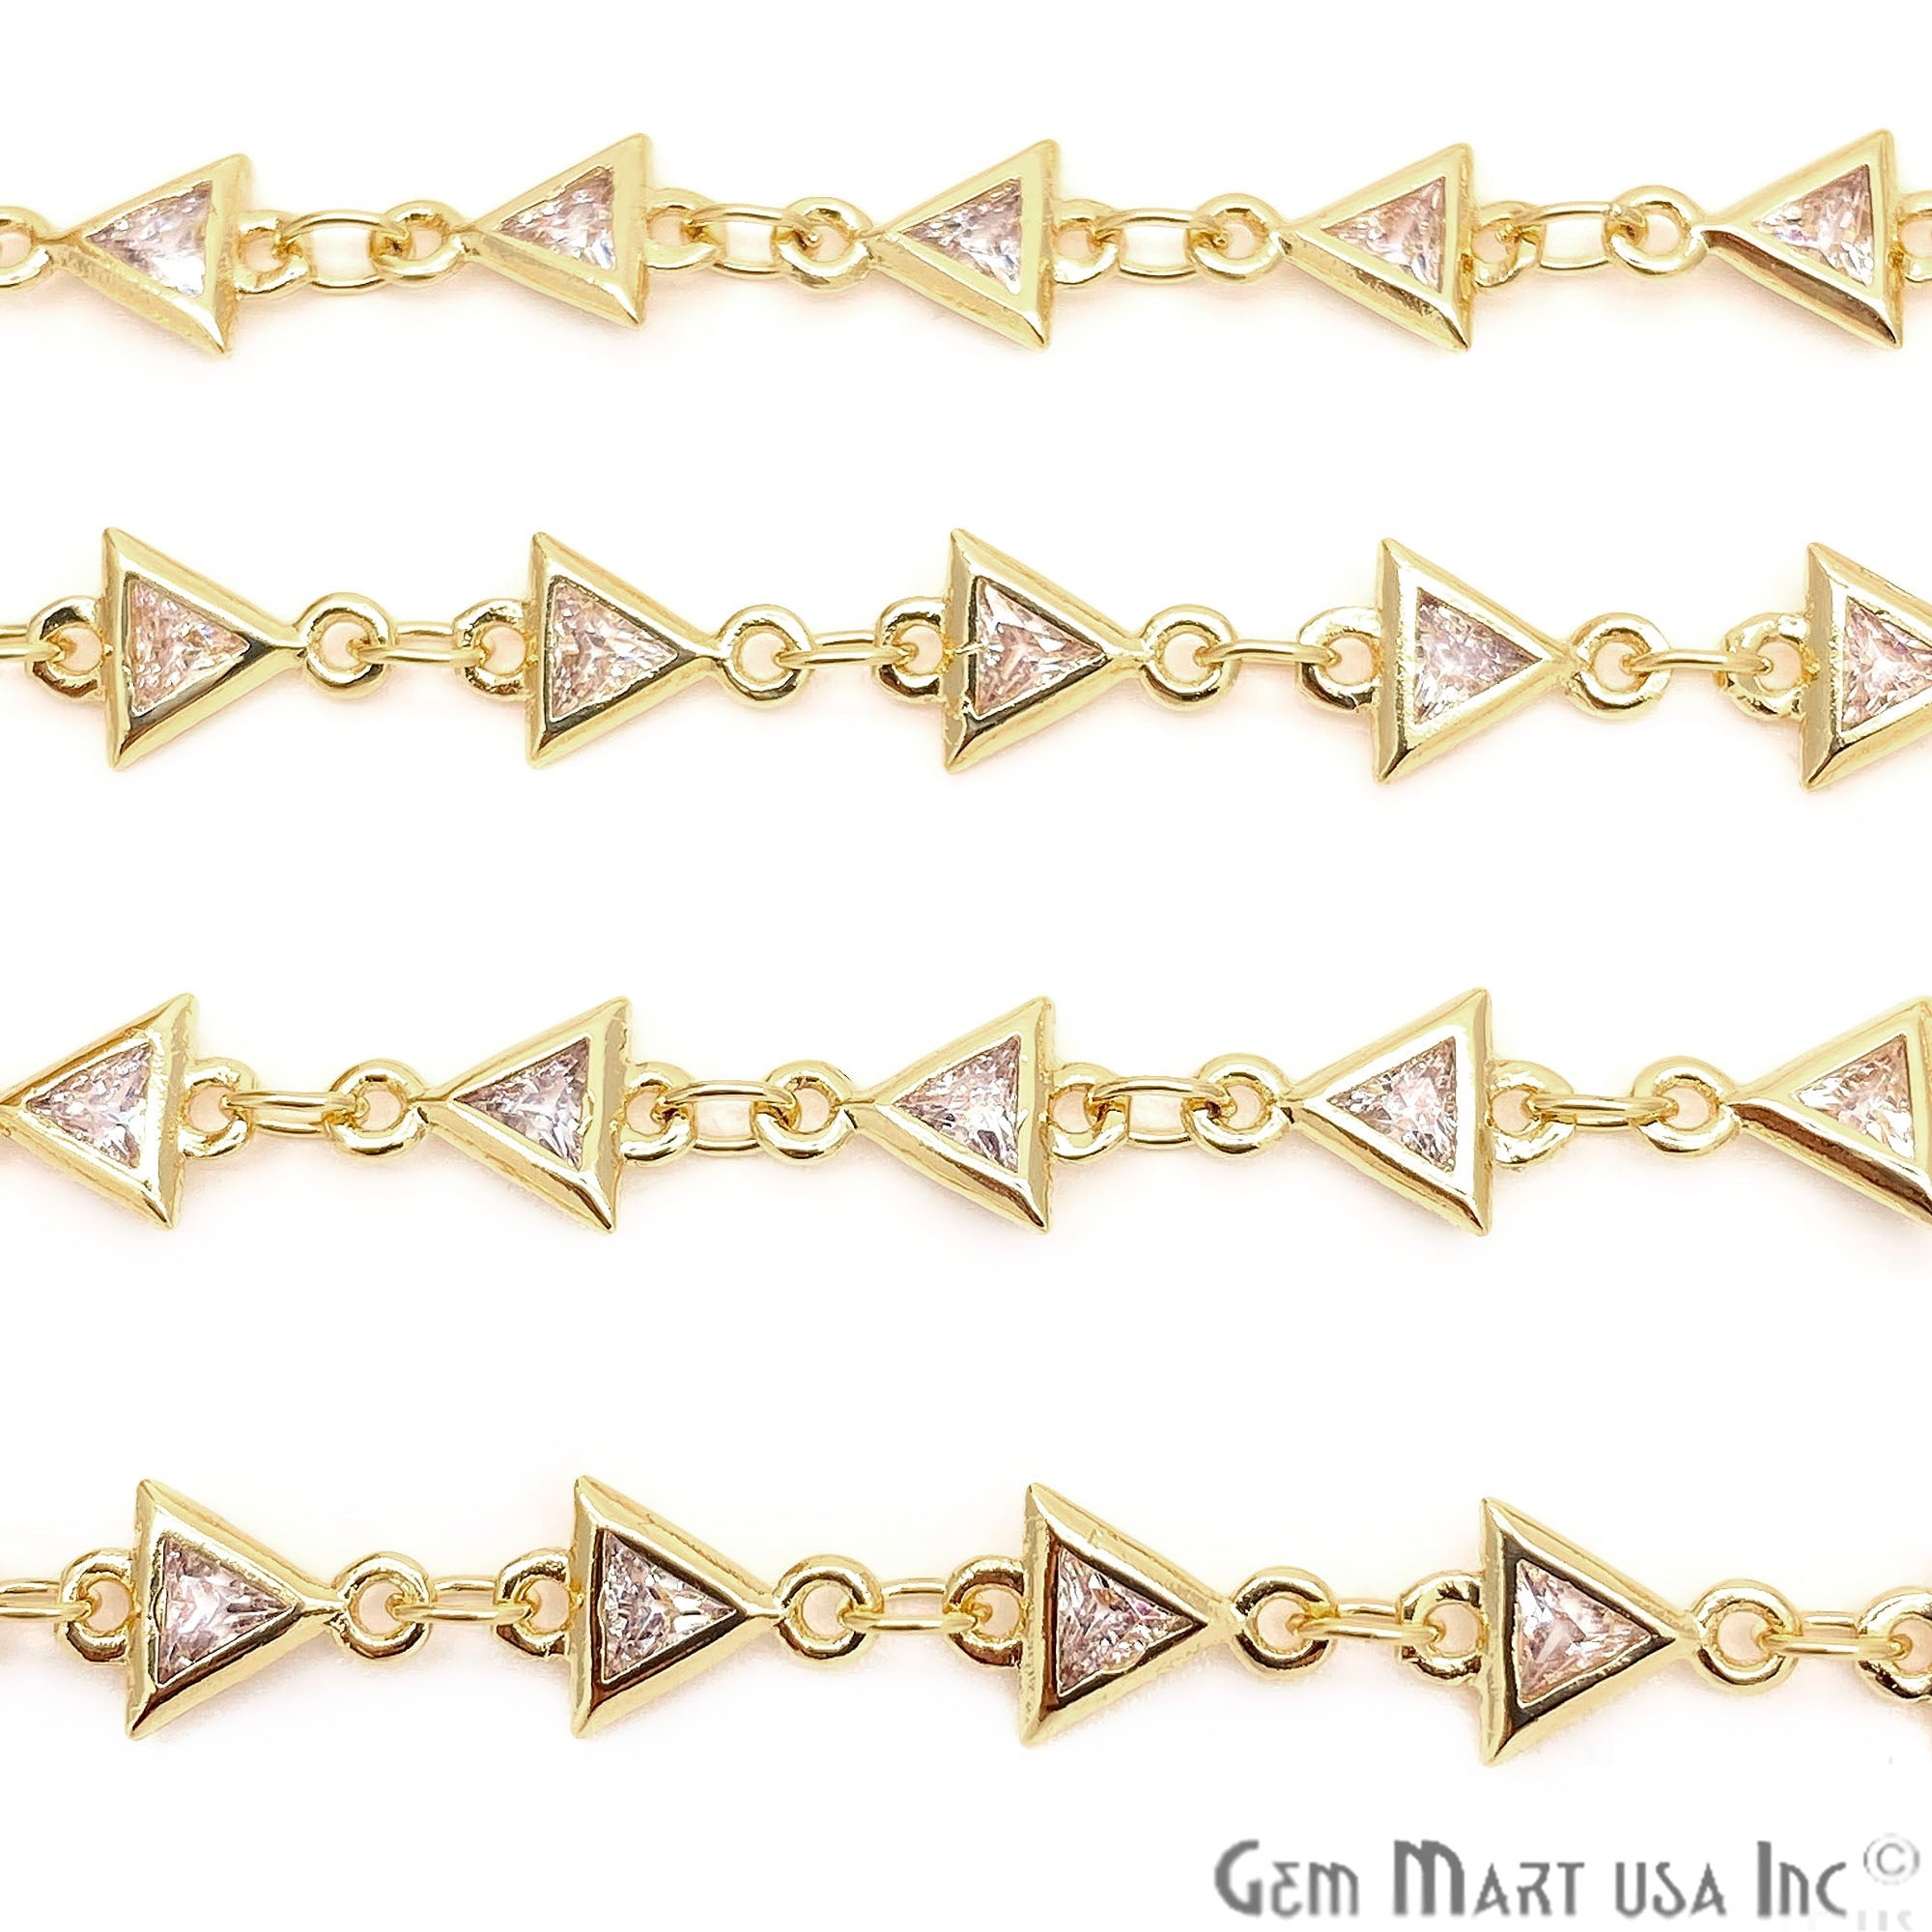 White Zircon TriAngel Shape 5x5mm Gold Plated Continuous Connector Chain - GemMartUSA